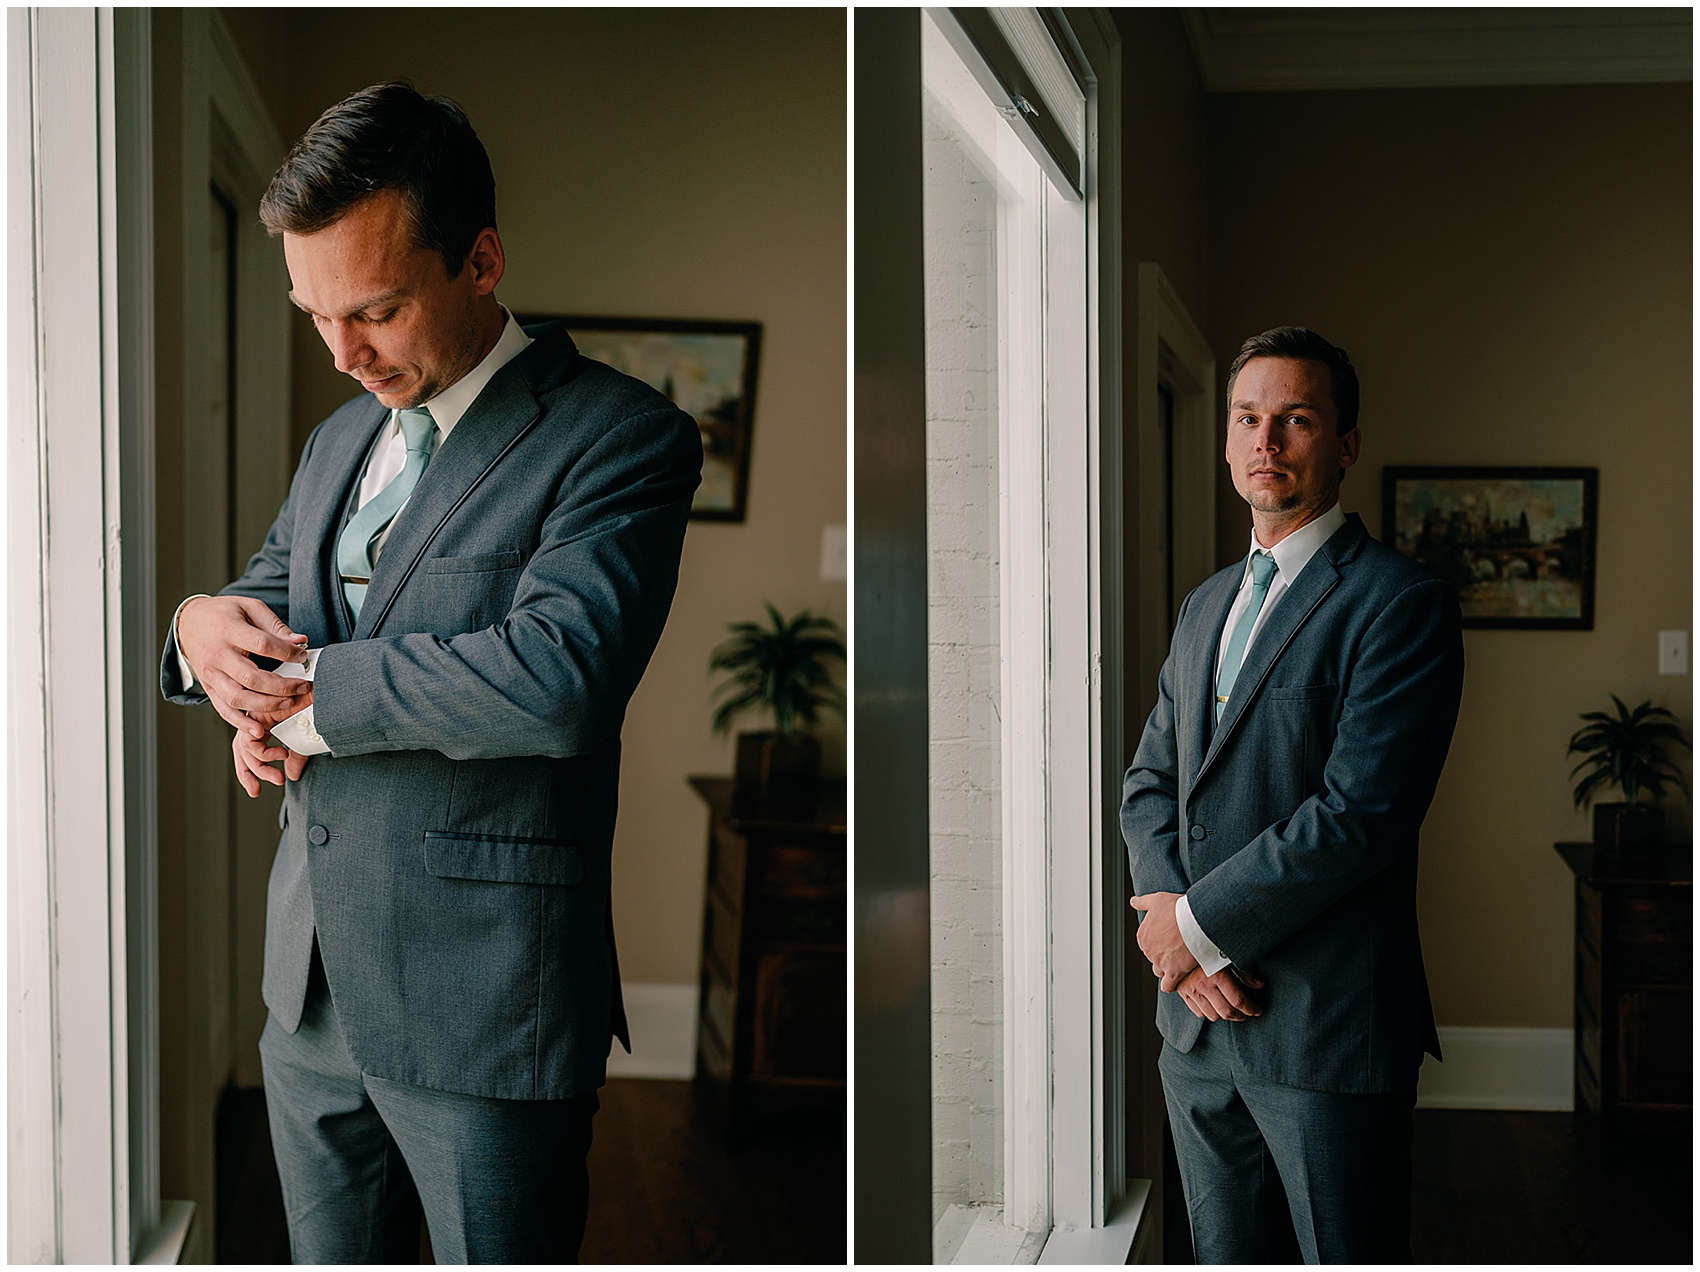 A groom puts on his cufflinks while standing in a window in a grey suit